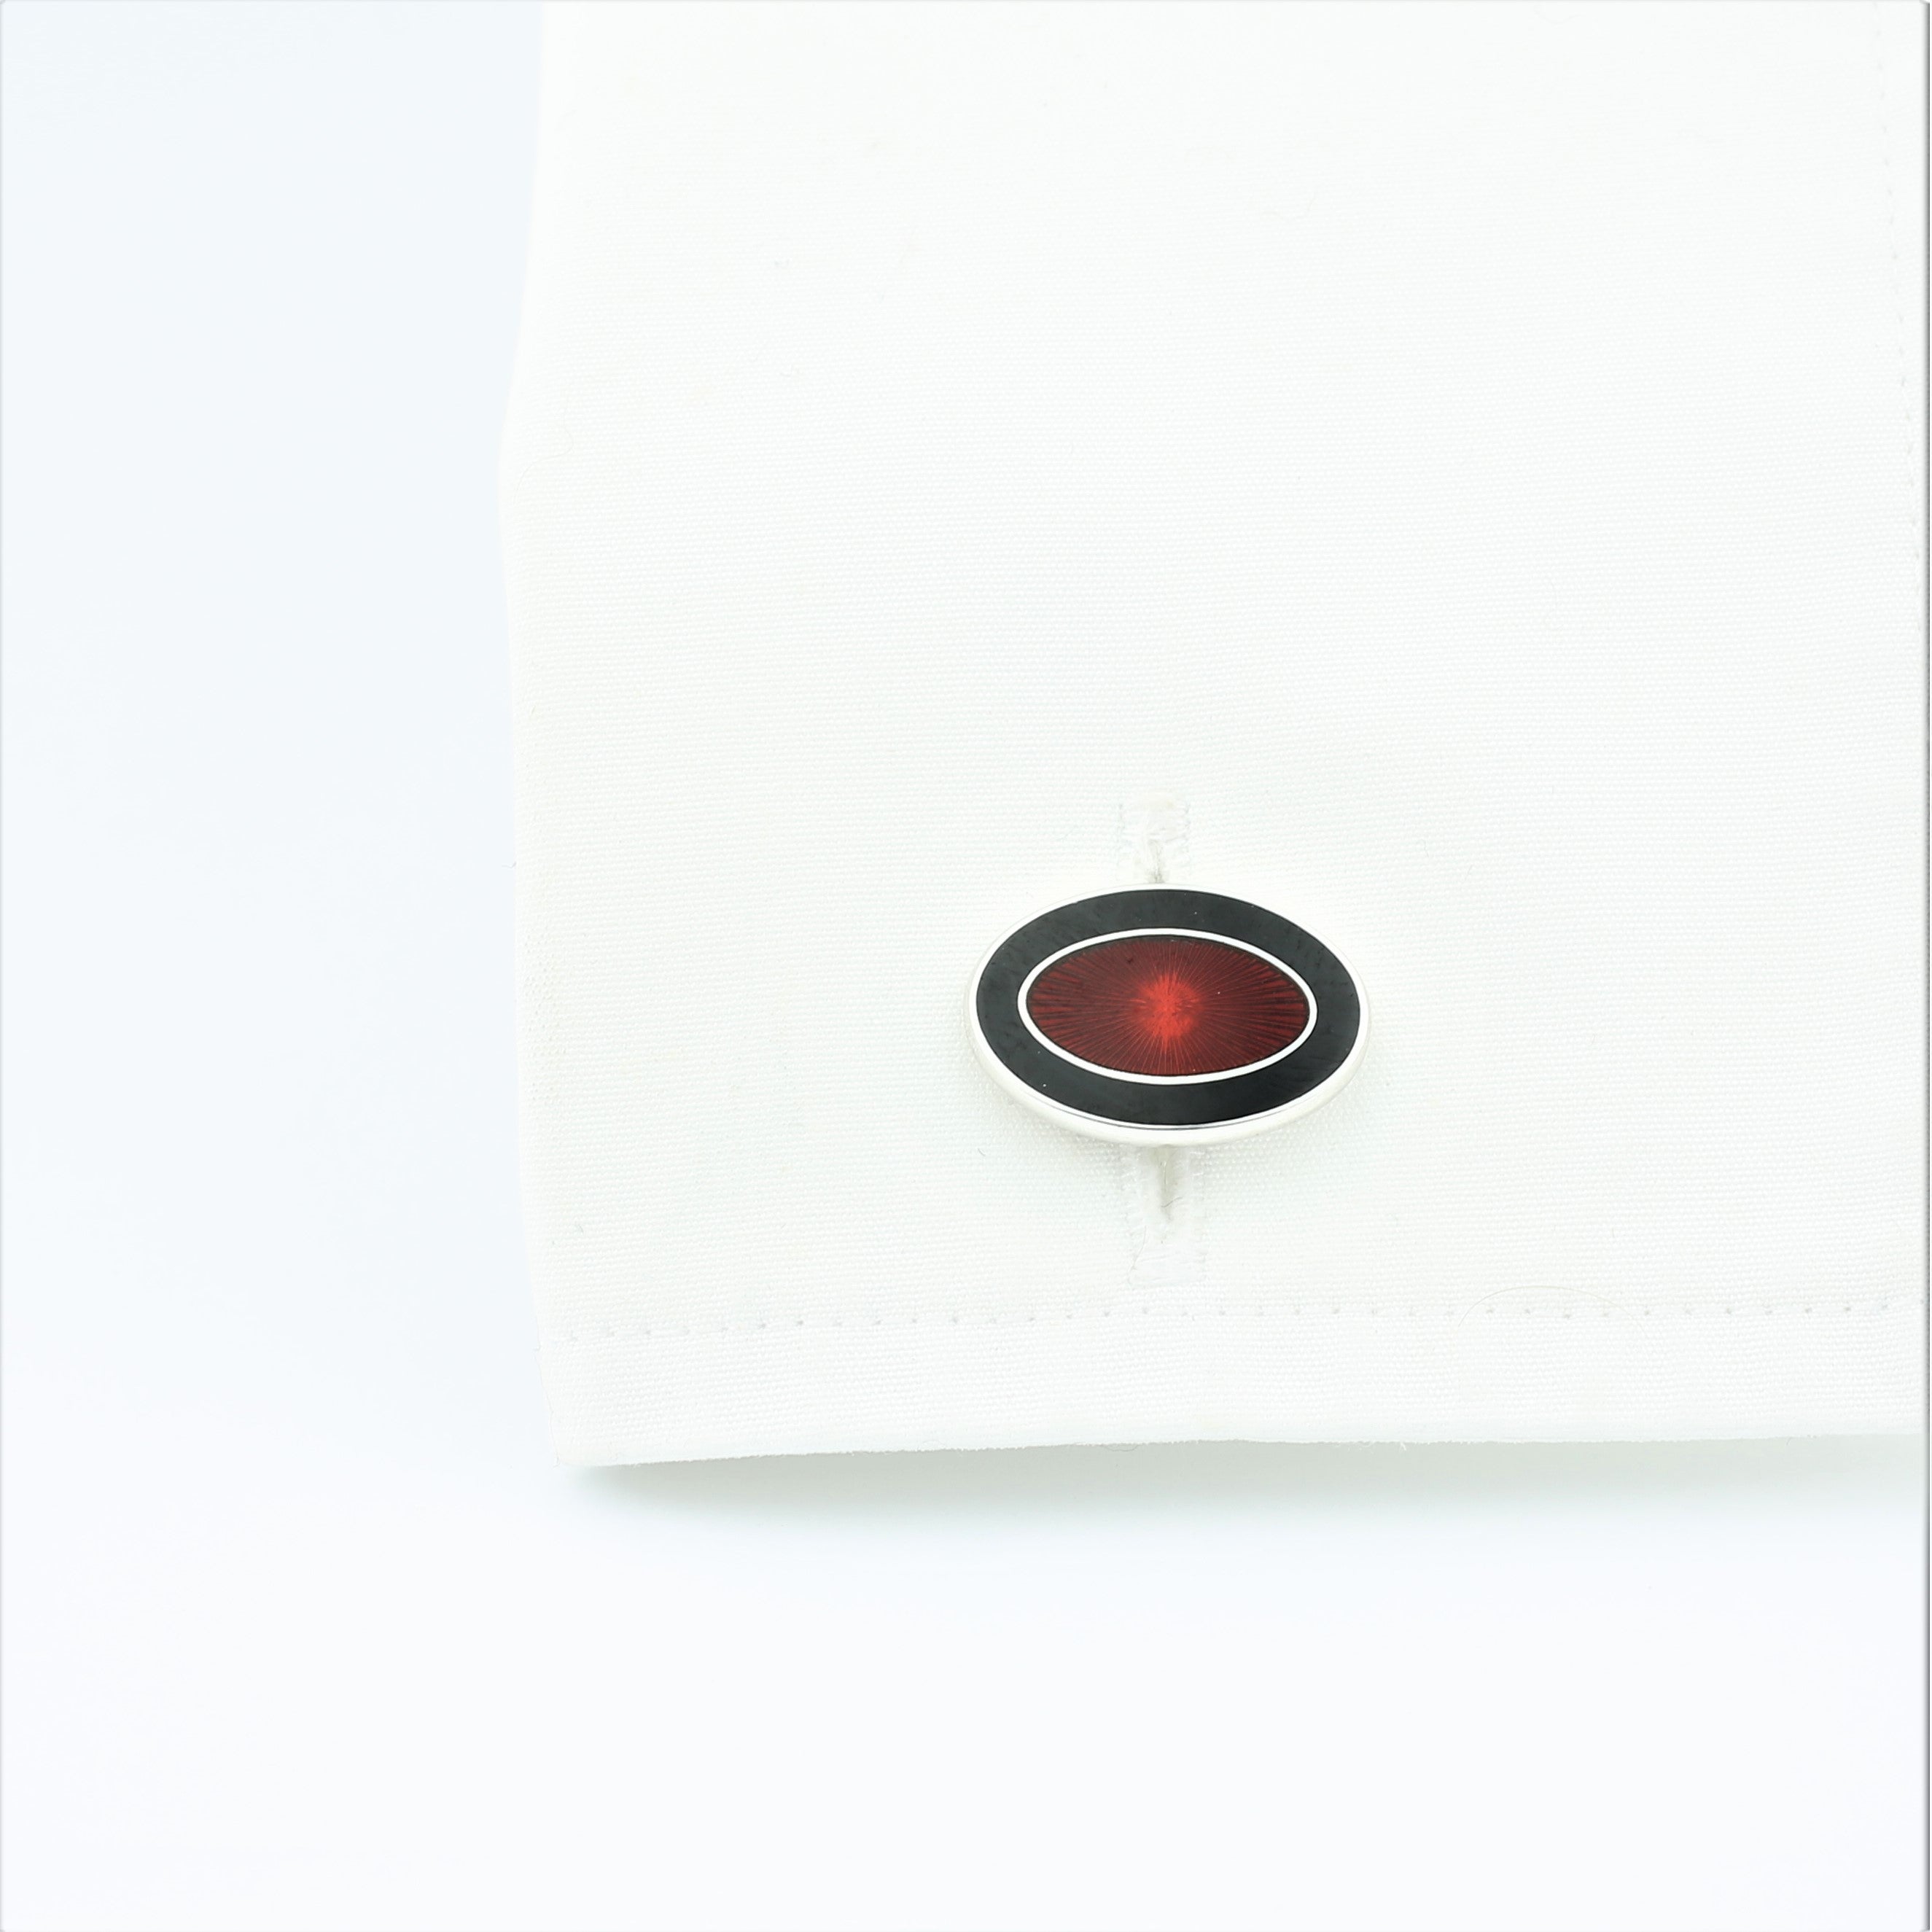 Double Oval Black and Red enamel on sterling silver - in a cuff